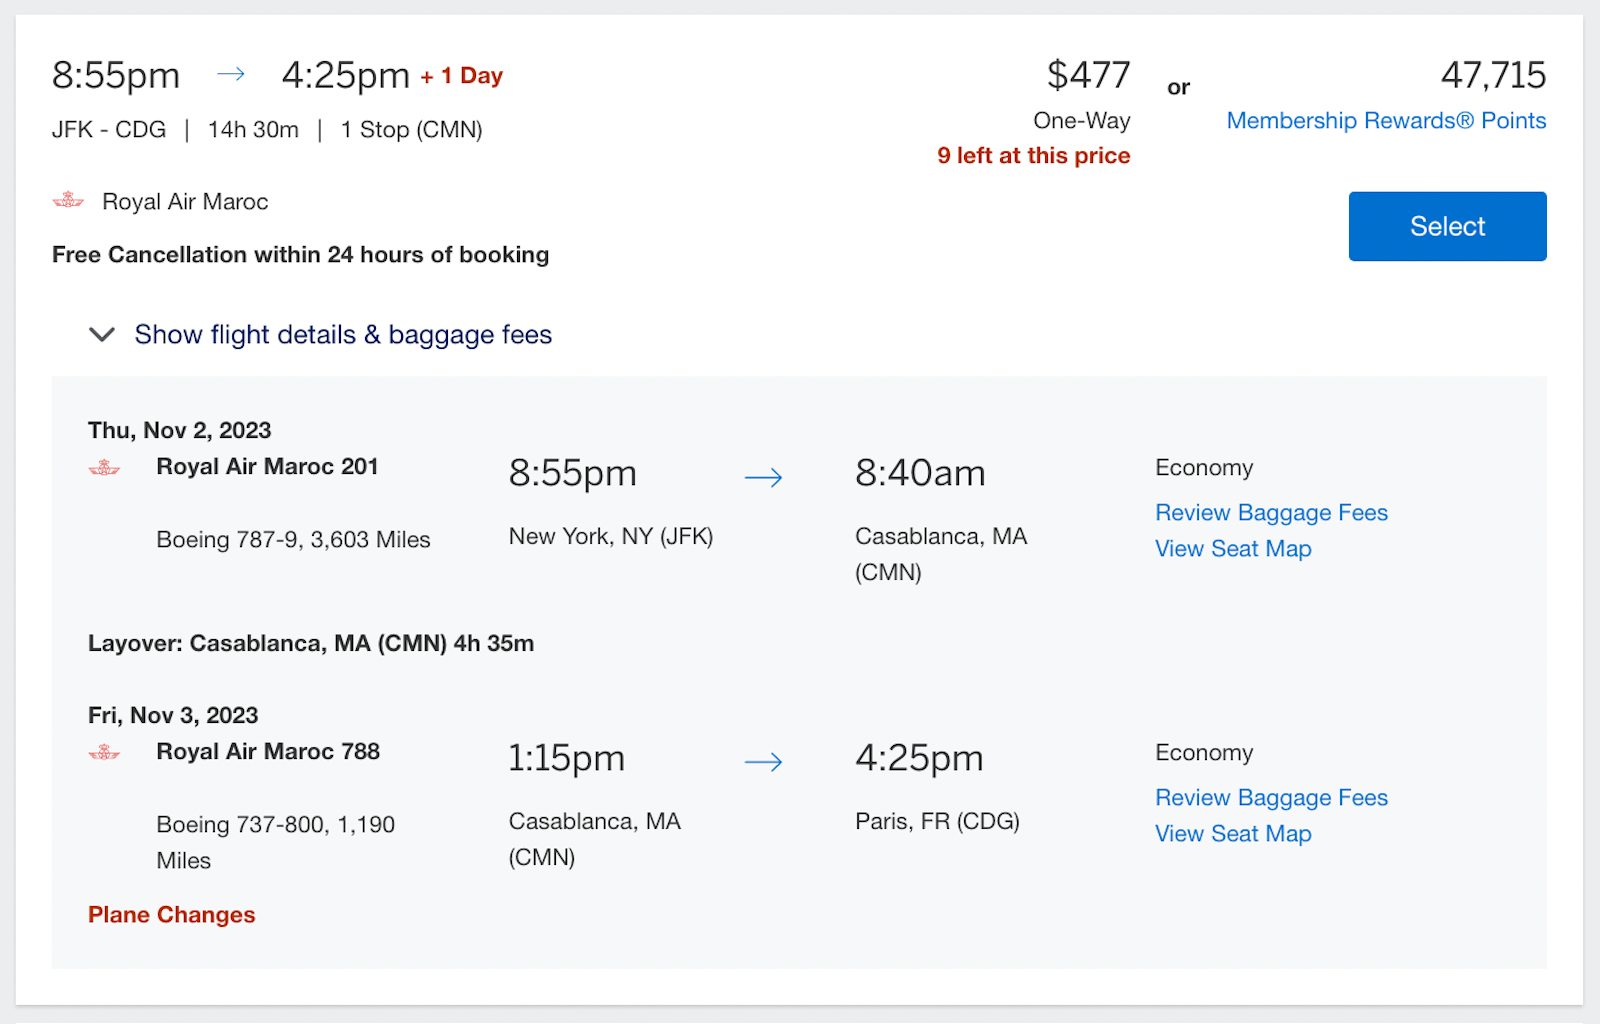 flight pricing with Royal Air Maroc from New York to Casablanca and on to Paris, found on Amex Travel website